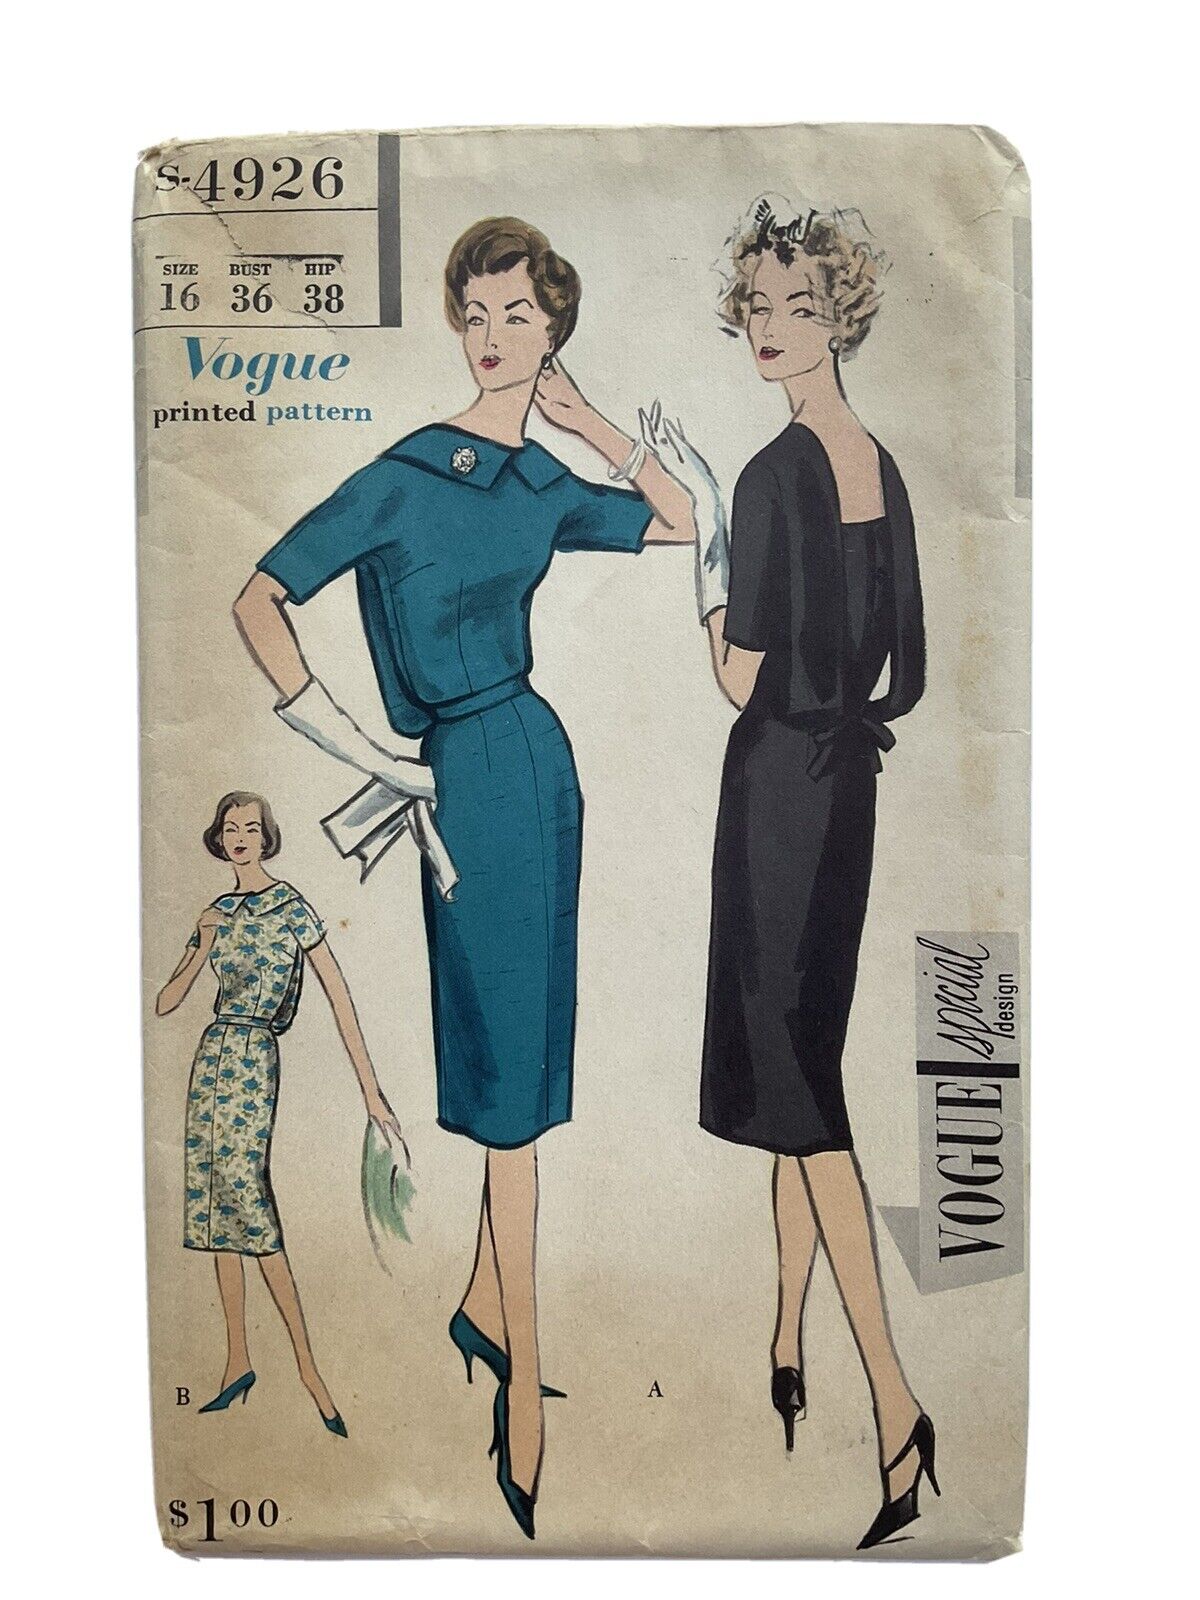 Vintage Vogue Sewing Pattern #4926 Printed Cut Size 16 1958 Complete